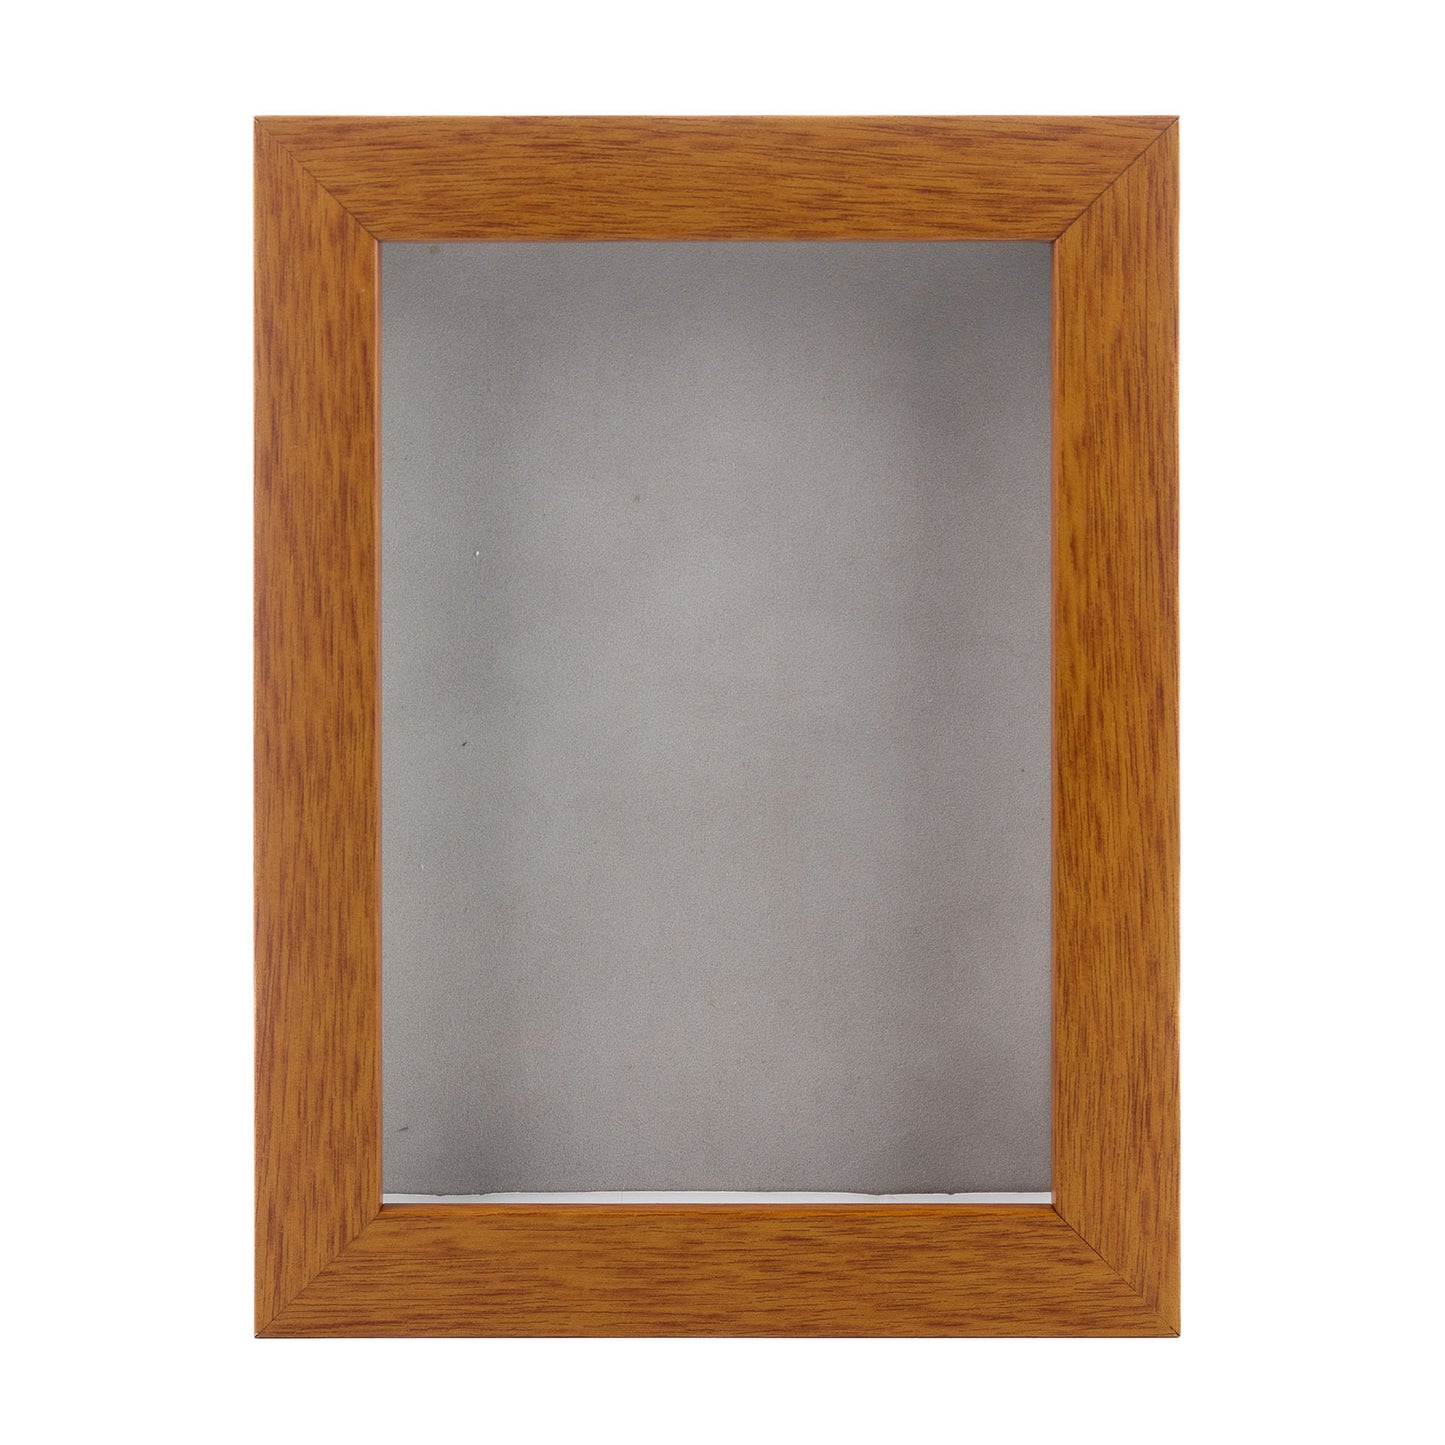 Honey Pecan Shadow Box Frame With Light Grey Acid-Free Suede Backing